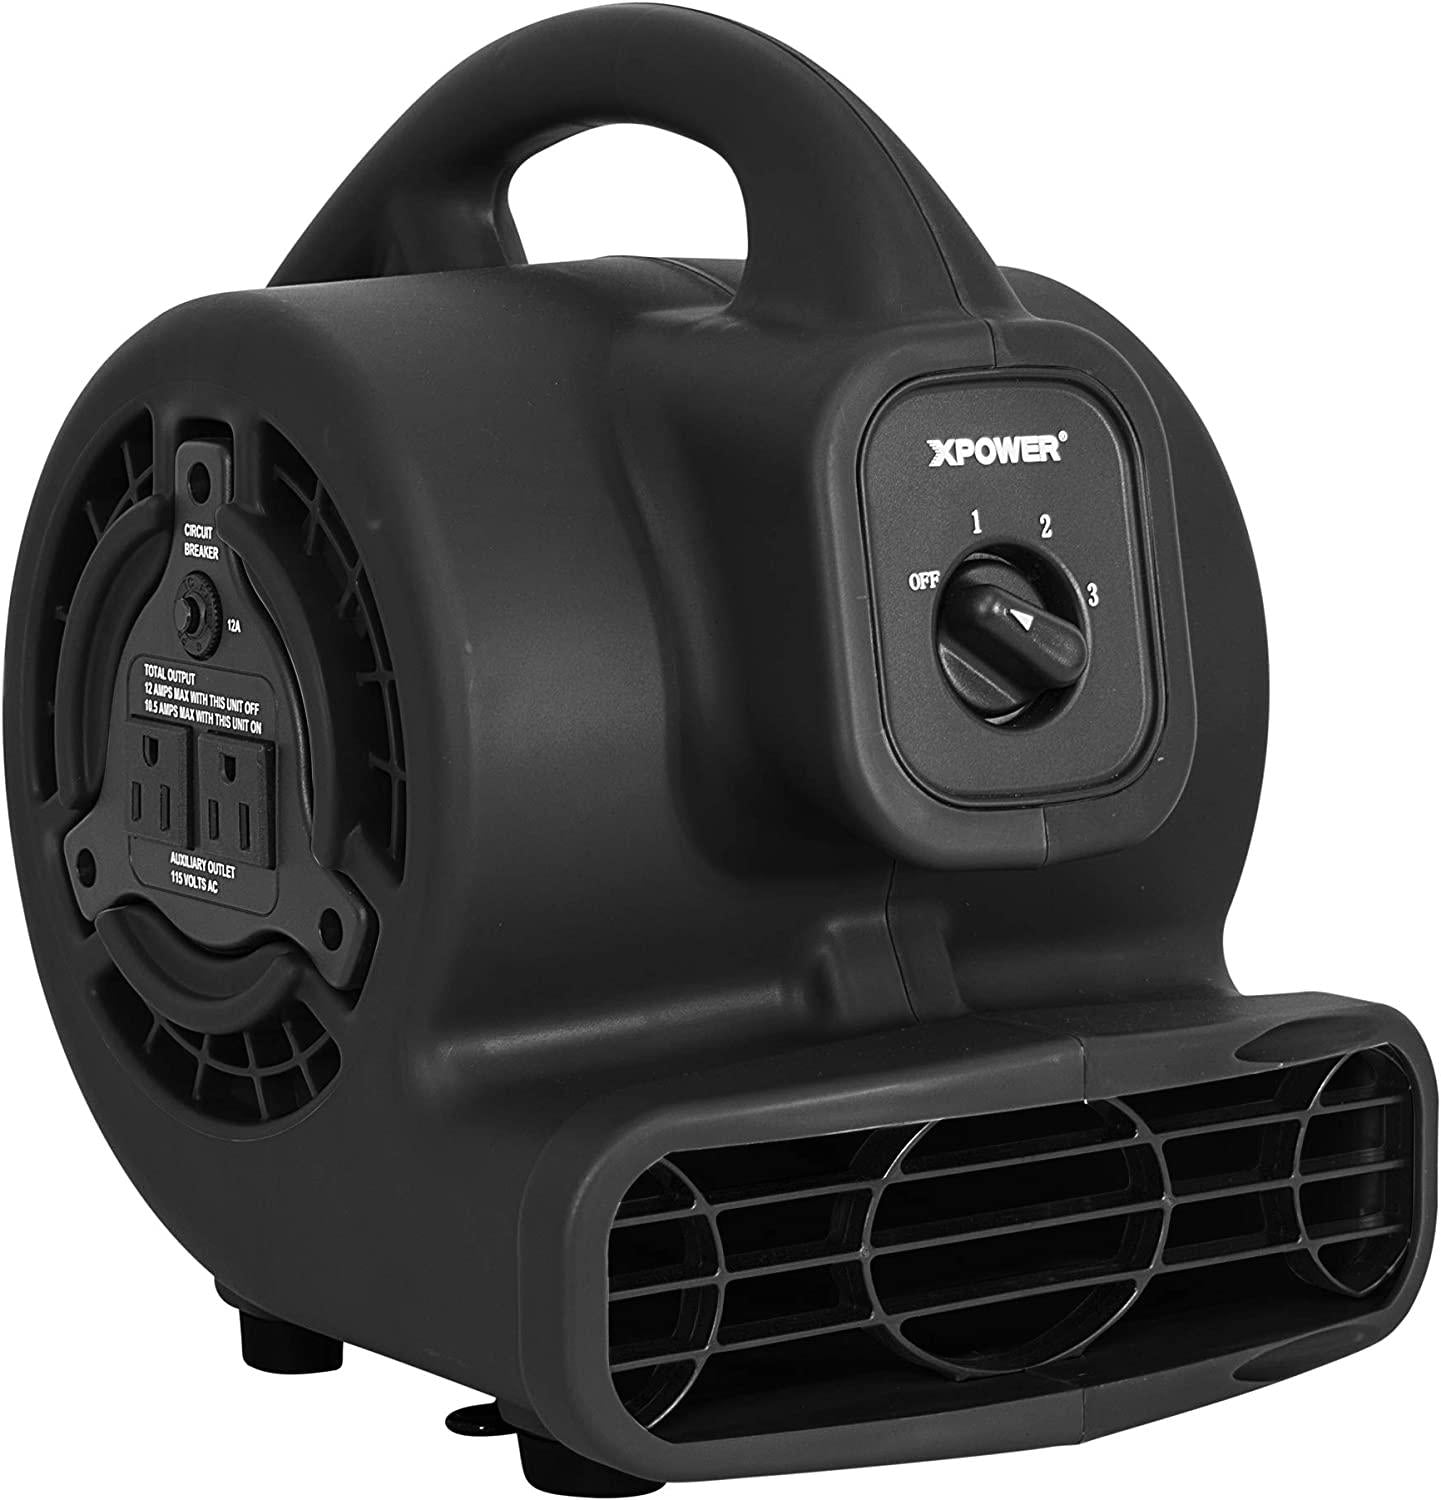 XPOWER P-80A Mini Mighty 138 W 600 CFM Centrifugal Air Mover, Carpet Dryer, Floor Fan, Blower, Stackable, Daisy Chain, for Water Damage Restoration, Janitorial, Plumbing, Home Use, Black-